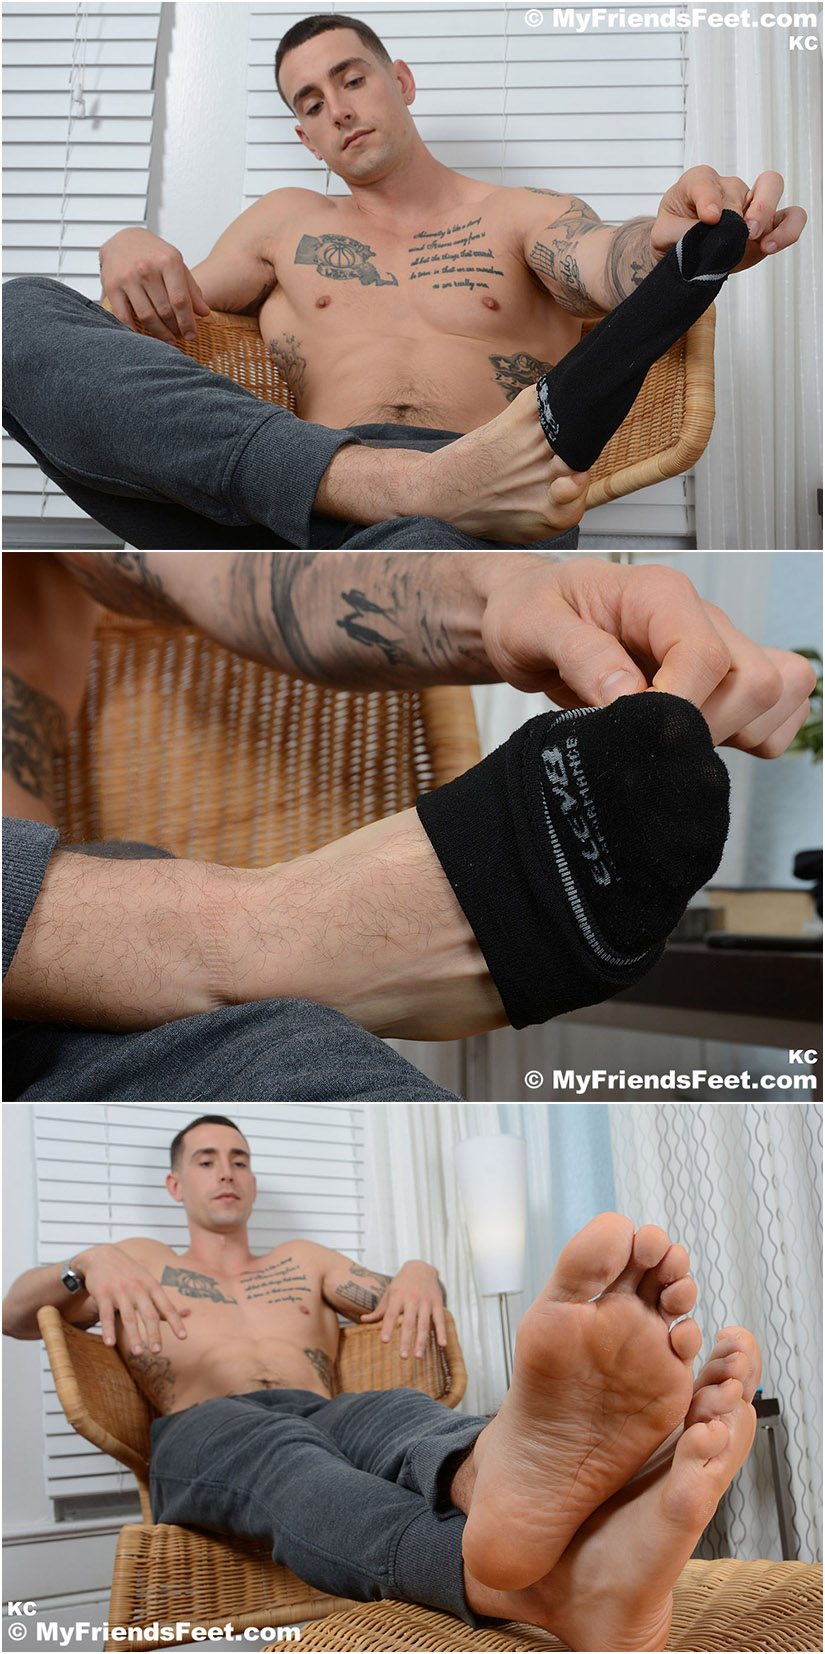 Tattooed hunk takes off his socks to show off his bare feet